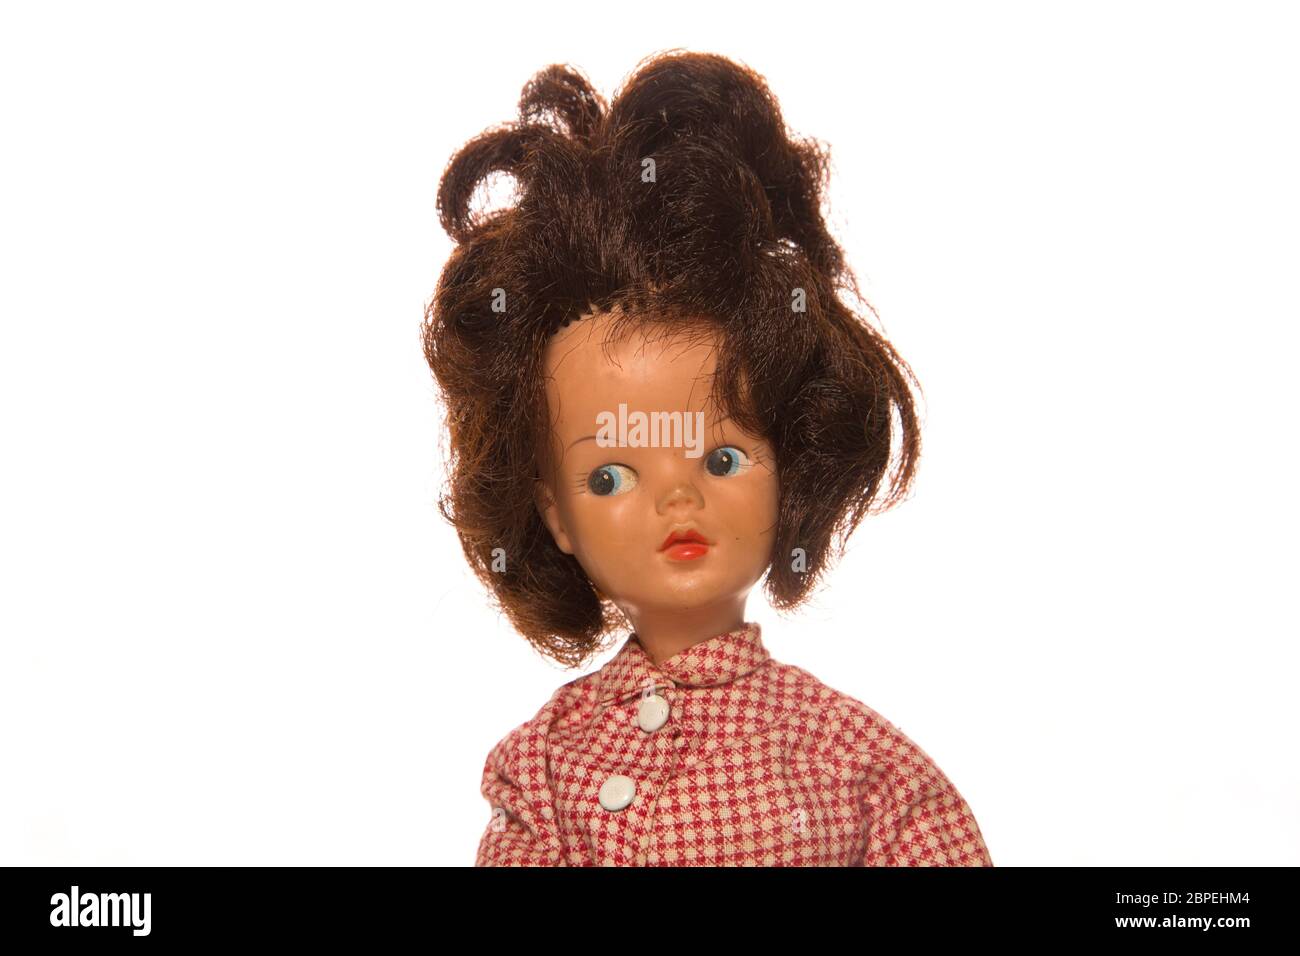 vintage Sindy doll isolated on a white background Stock Photo